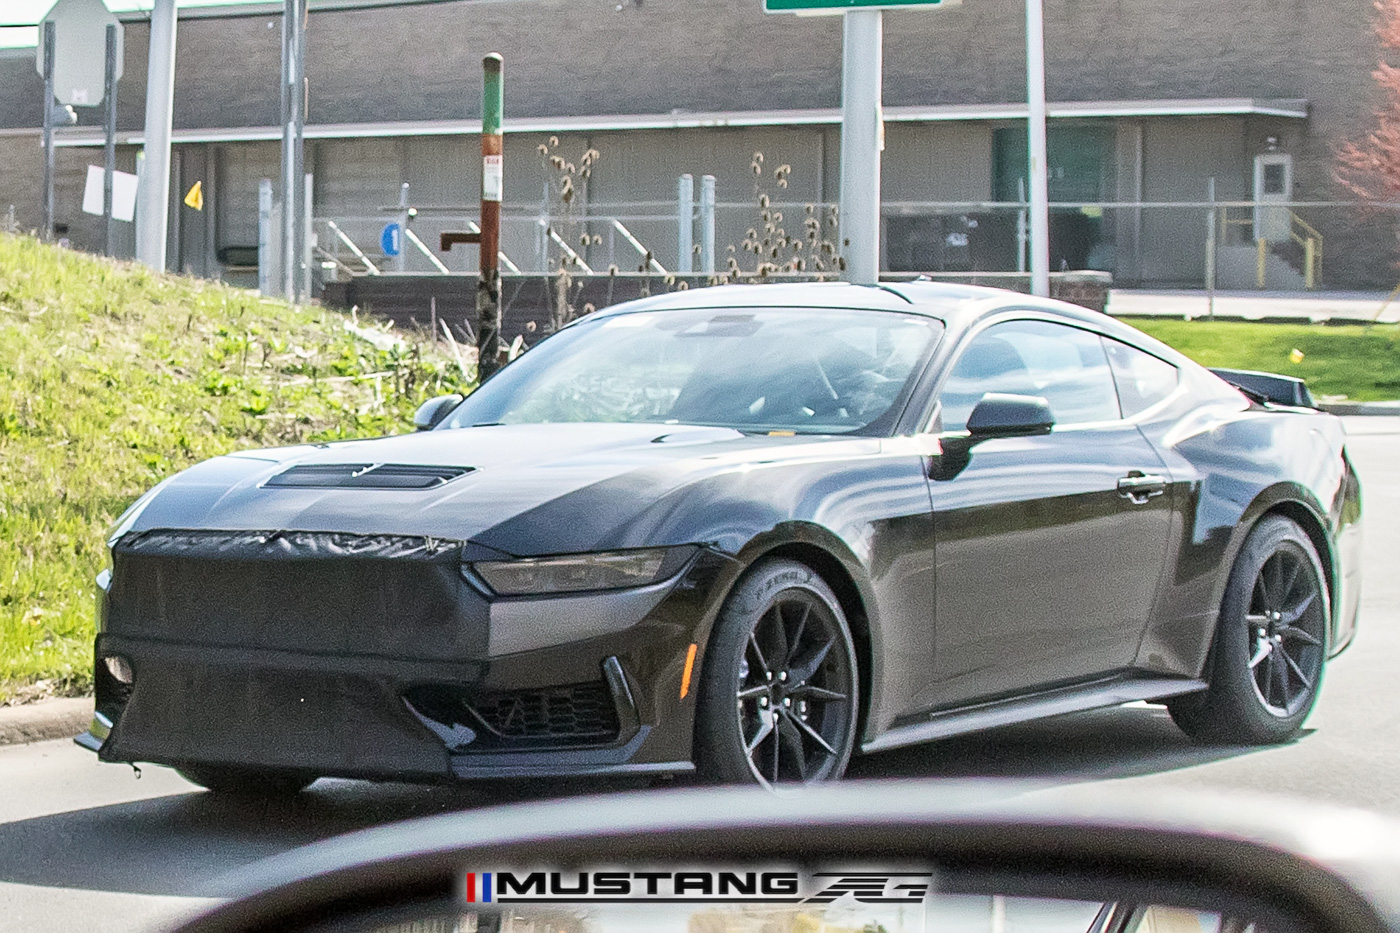 S650 Mustang 📸 Mustang GT3 Road-Version Prototype Spied Testing with Center-Exit Exhaust s650-mustang-variant-prototype-center-exit-exhaust-1